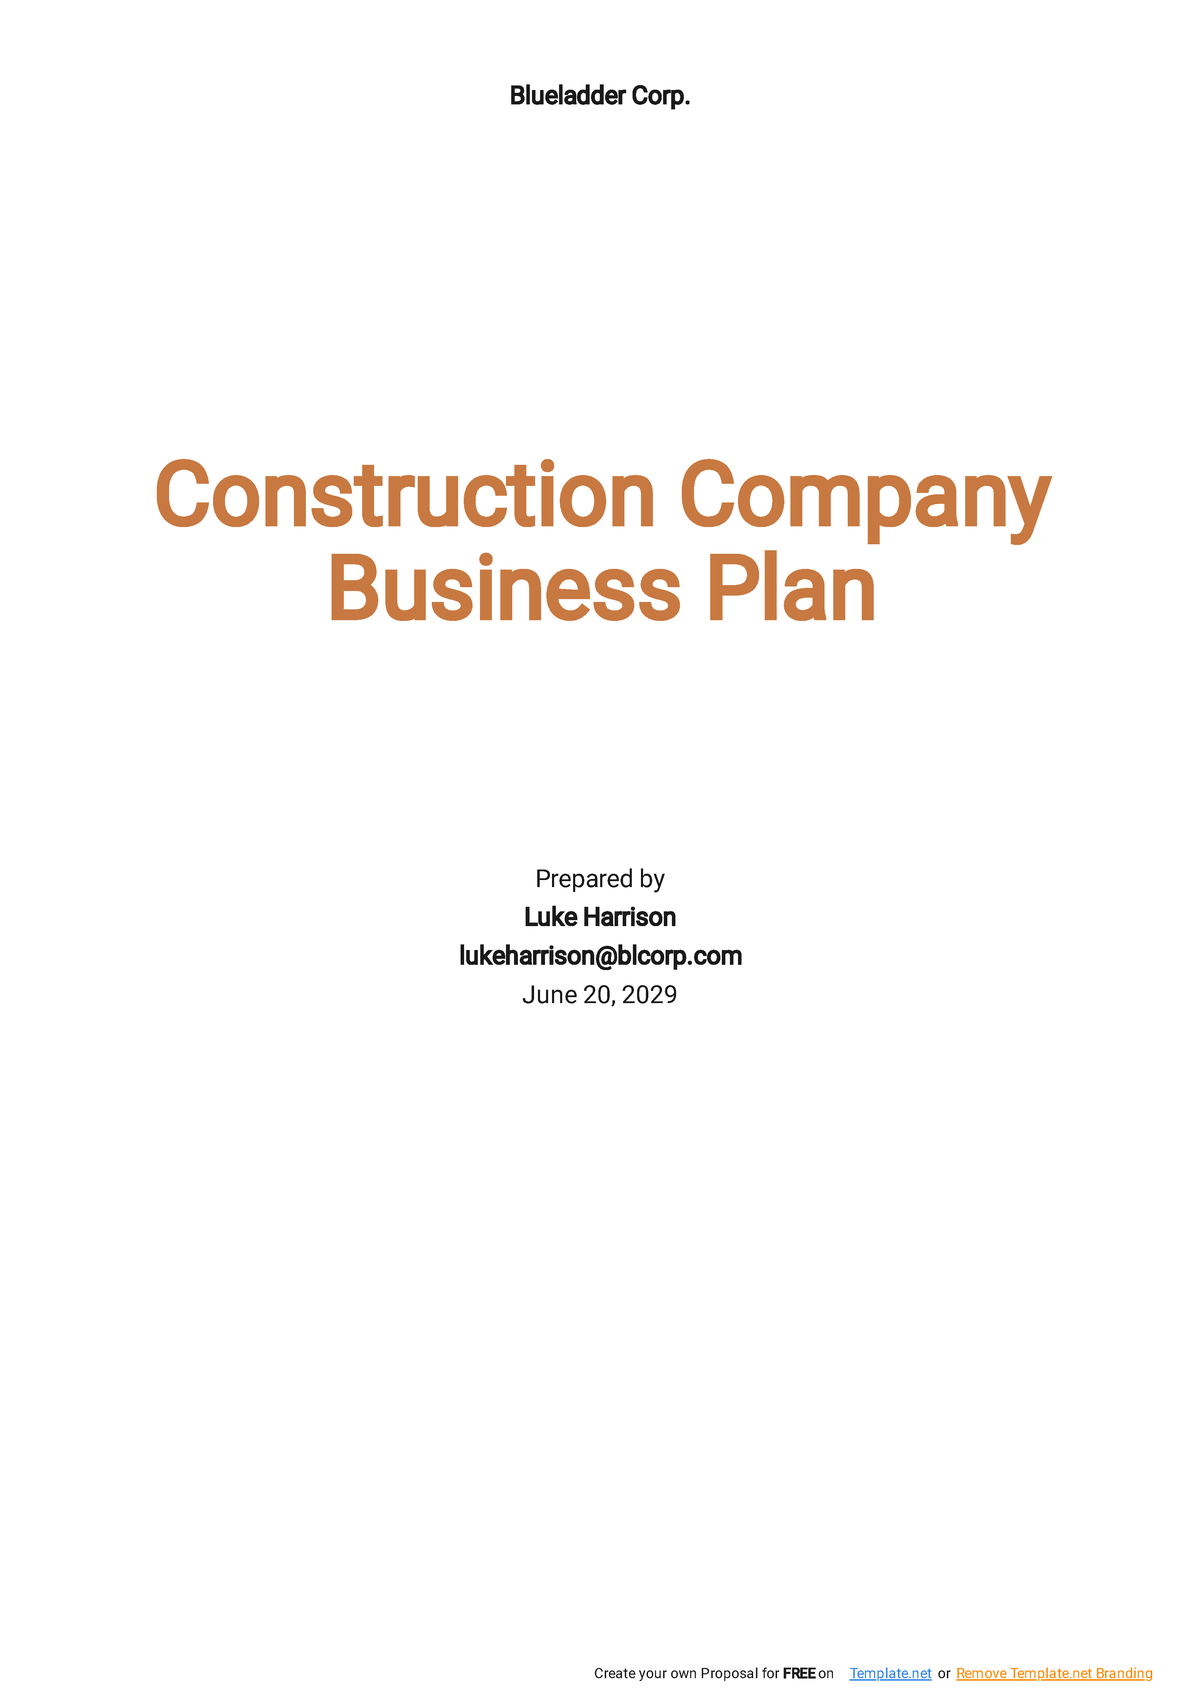 Copy of Construction Company Business Plan Template - Blueladder Corp ...